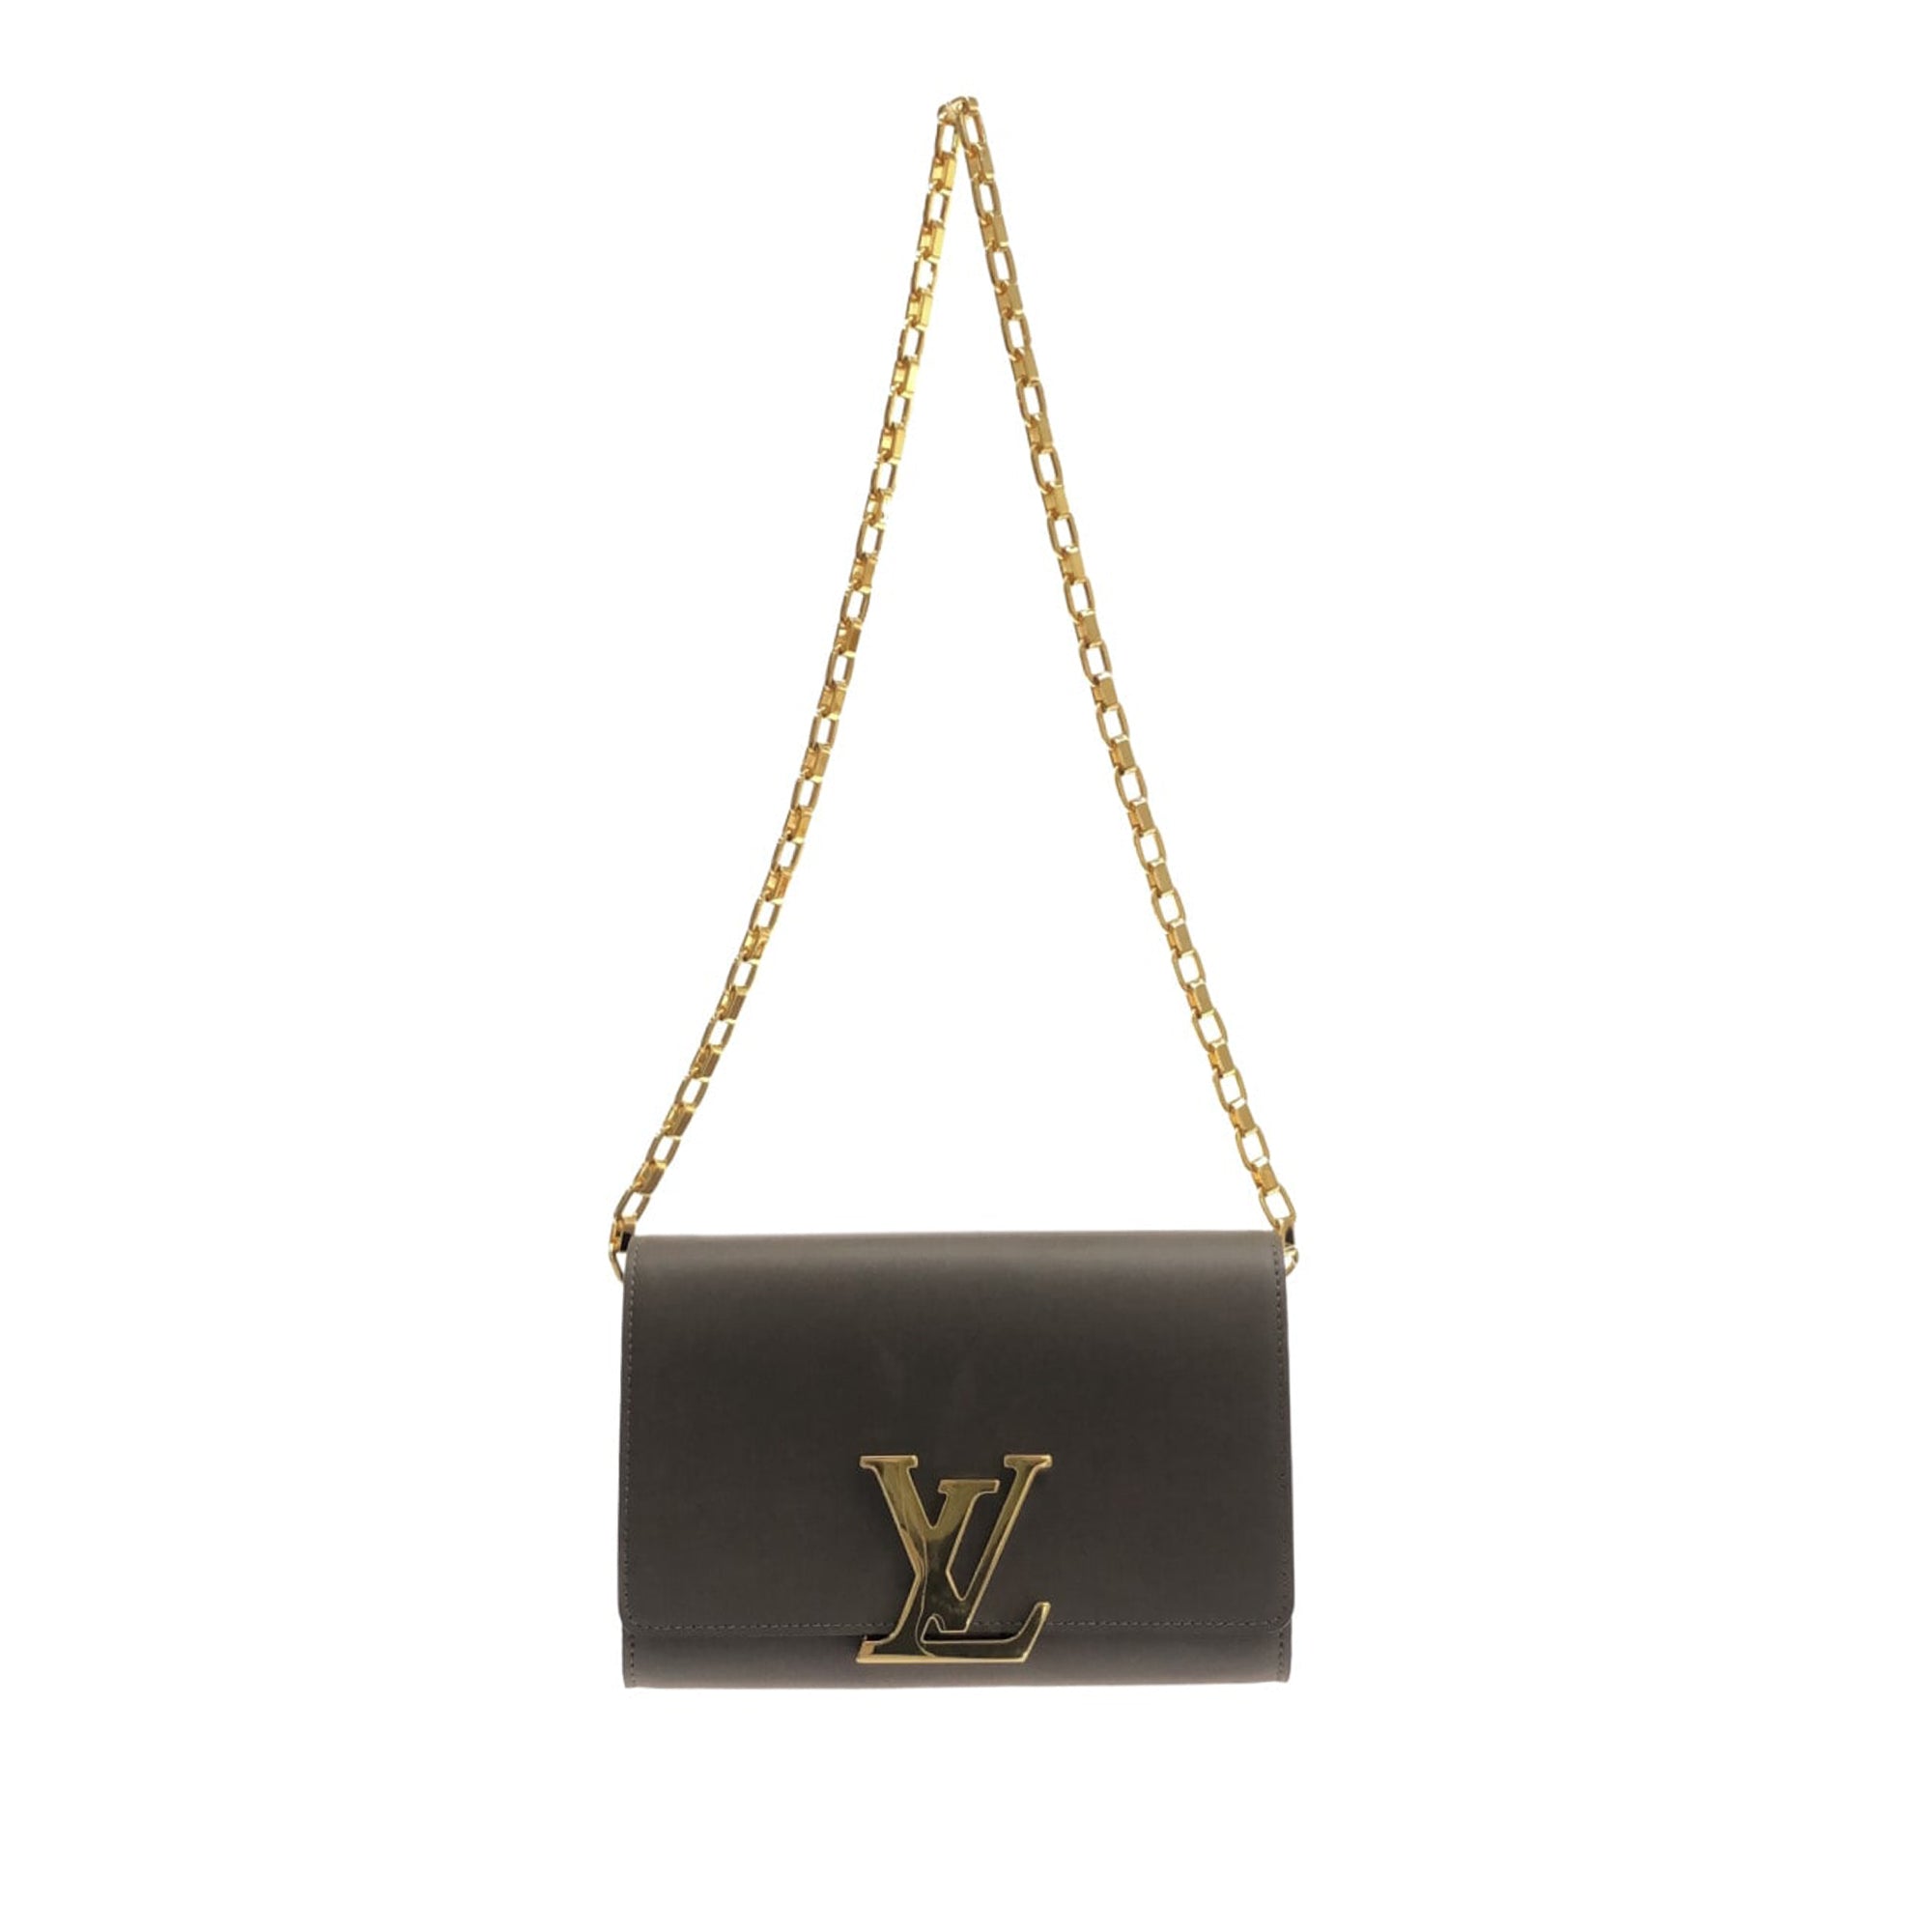 Authentic Louis Vuitton Chain Louise MM bag in Red